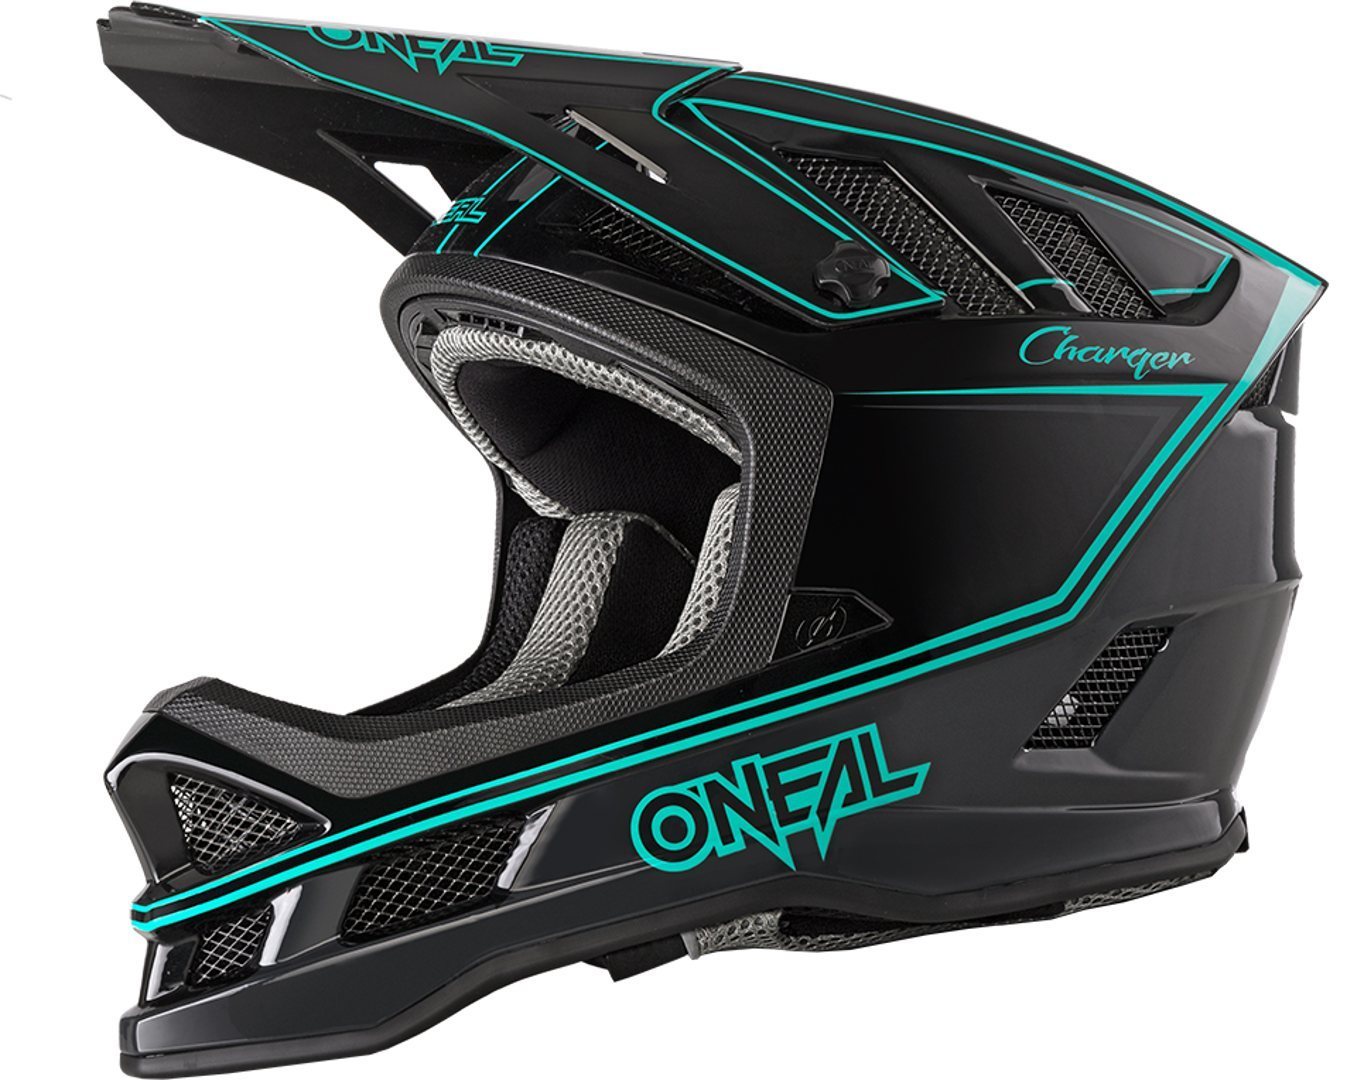 Oneal Blade Charger Casque descente Turquoise XS